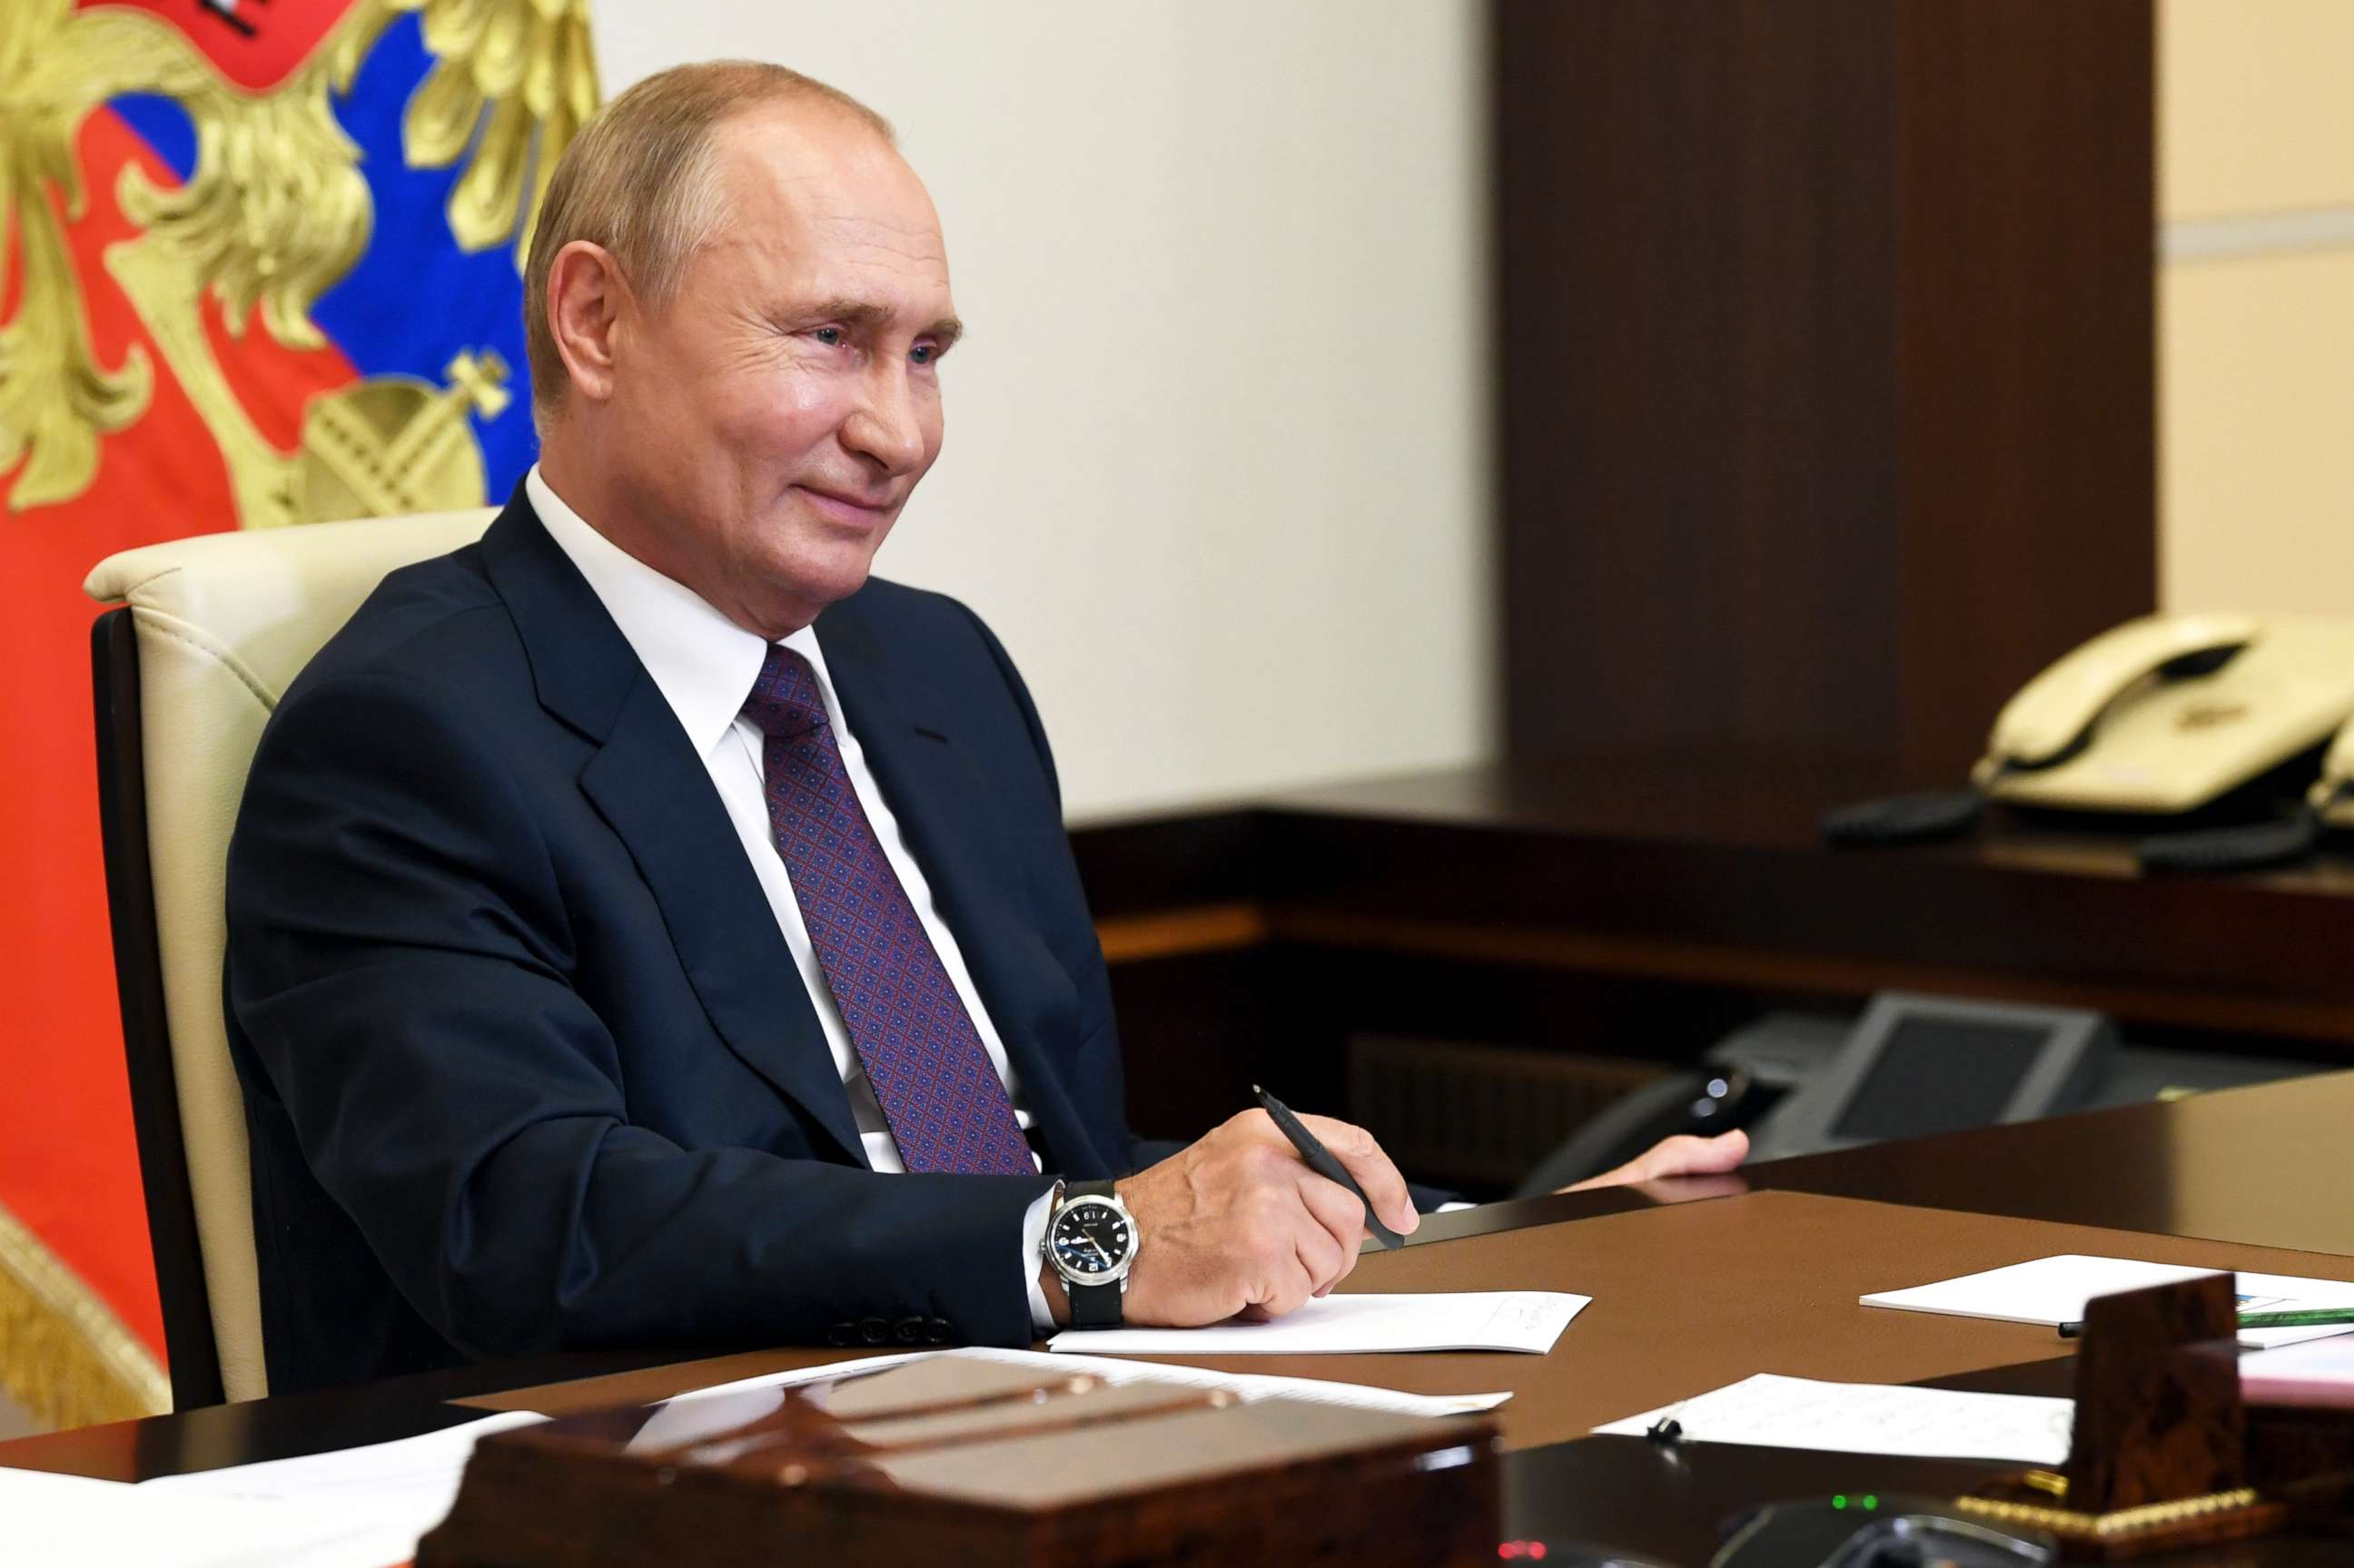 PHOTO: Russian President Vladimir Putin smiles as he attends a meeting via video conference at the Novo-Ogaryovo residence outside Moscow, Russia, Aug. 20, 2020.